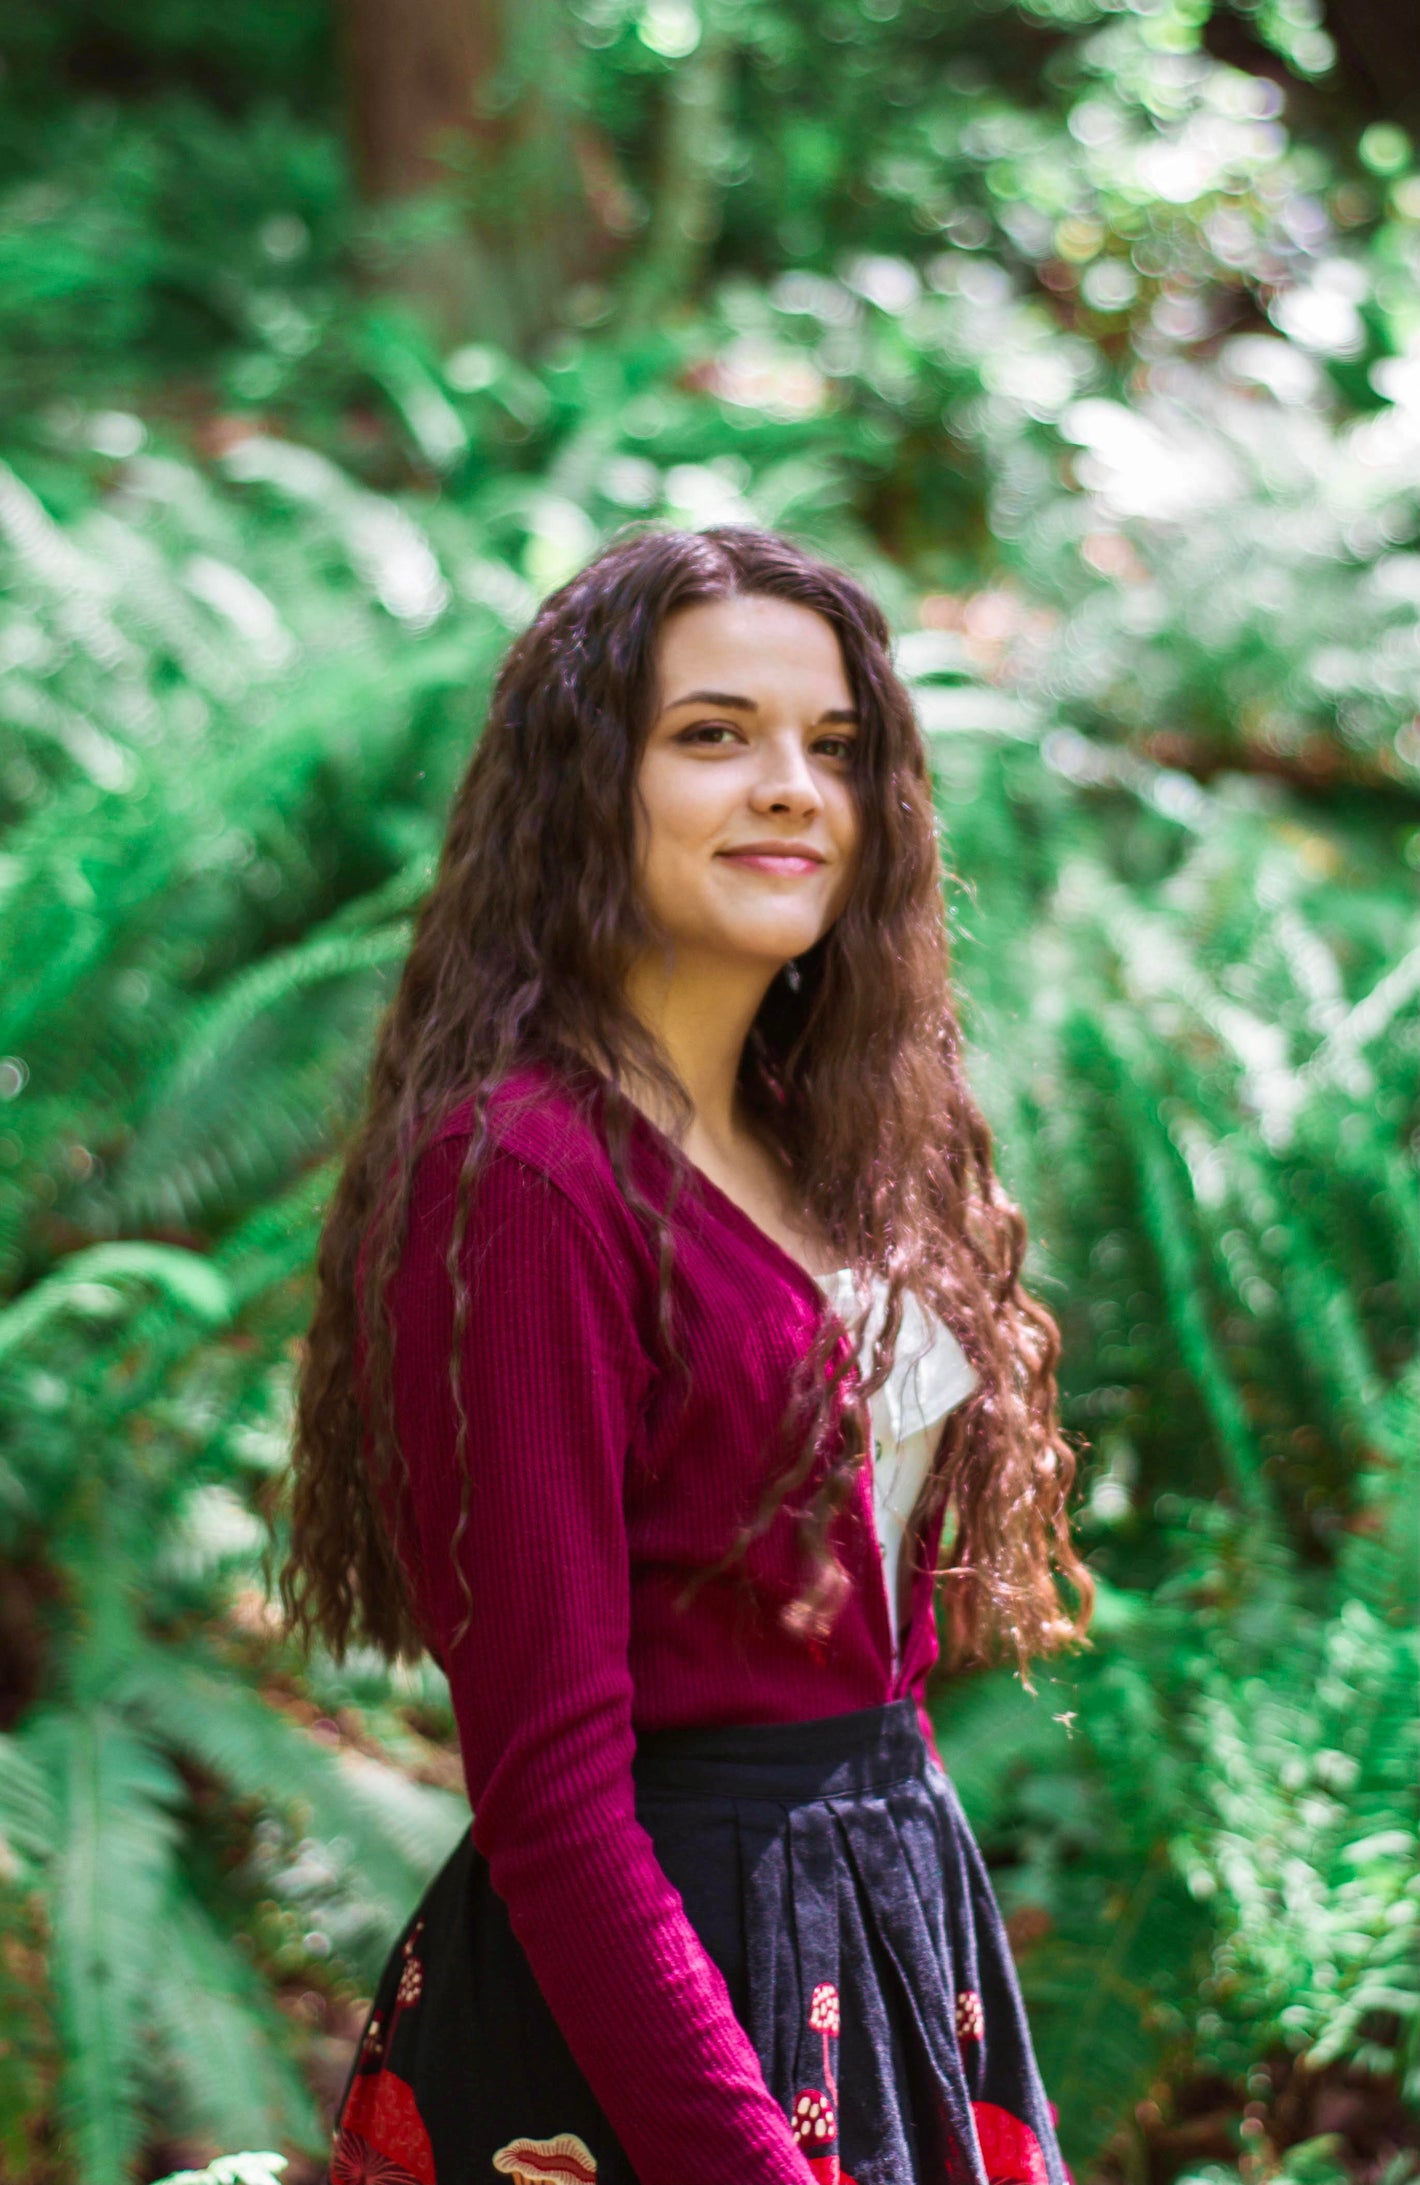 A smiling human in a forest with long brown wavy hair and a red cardigan.